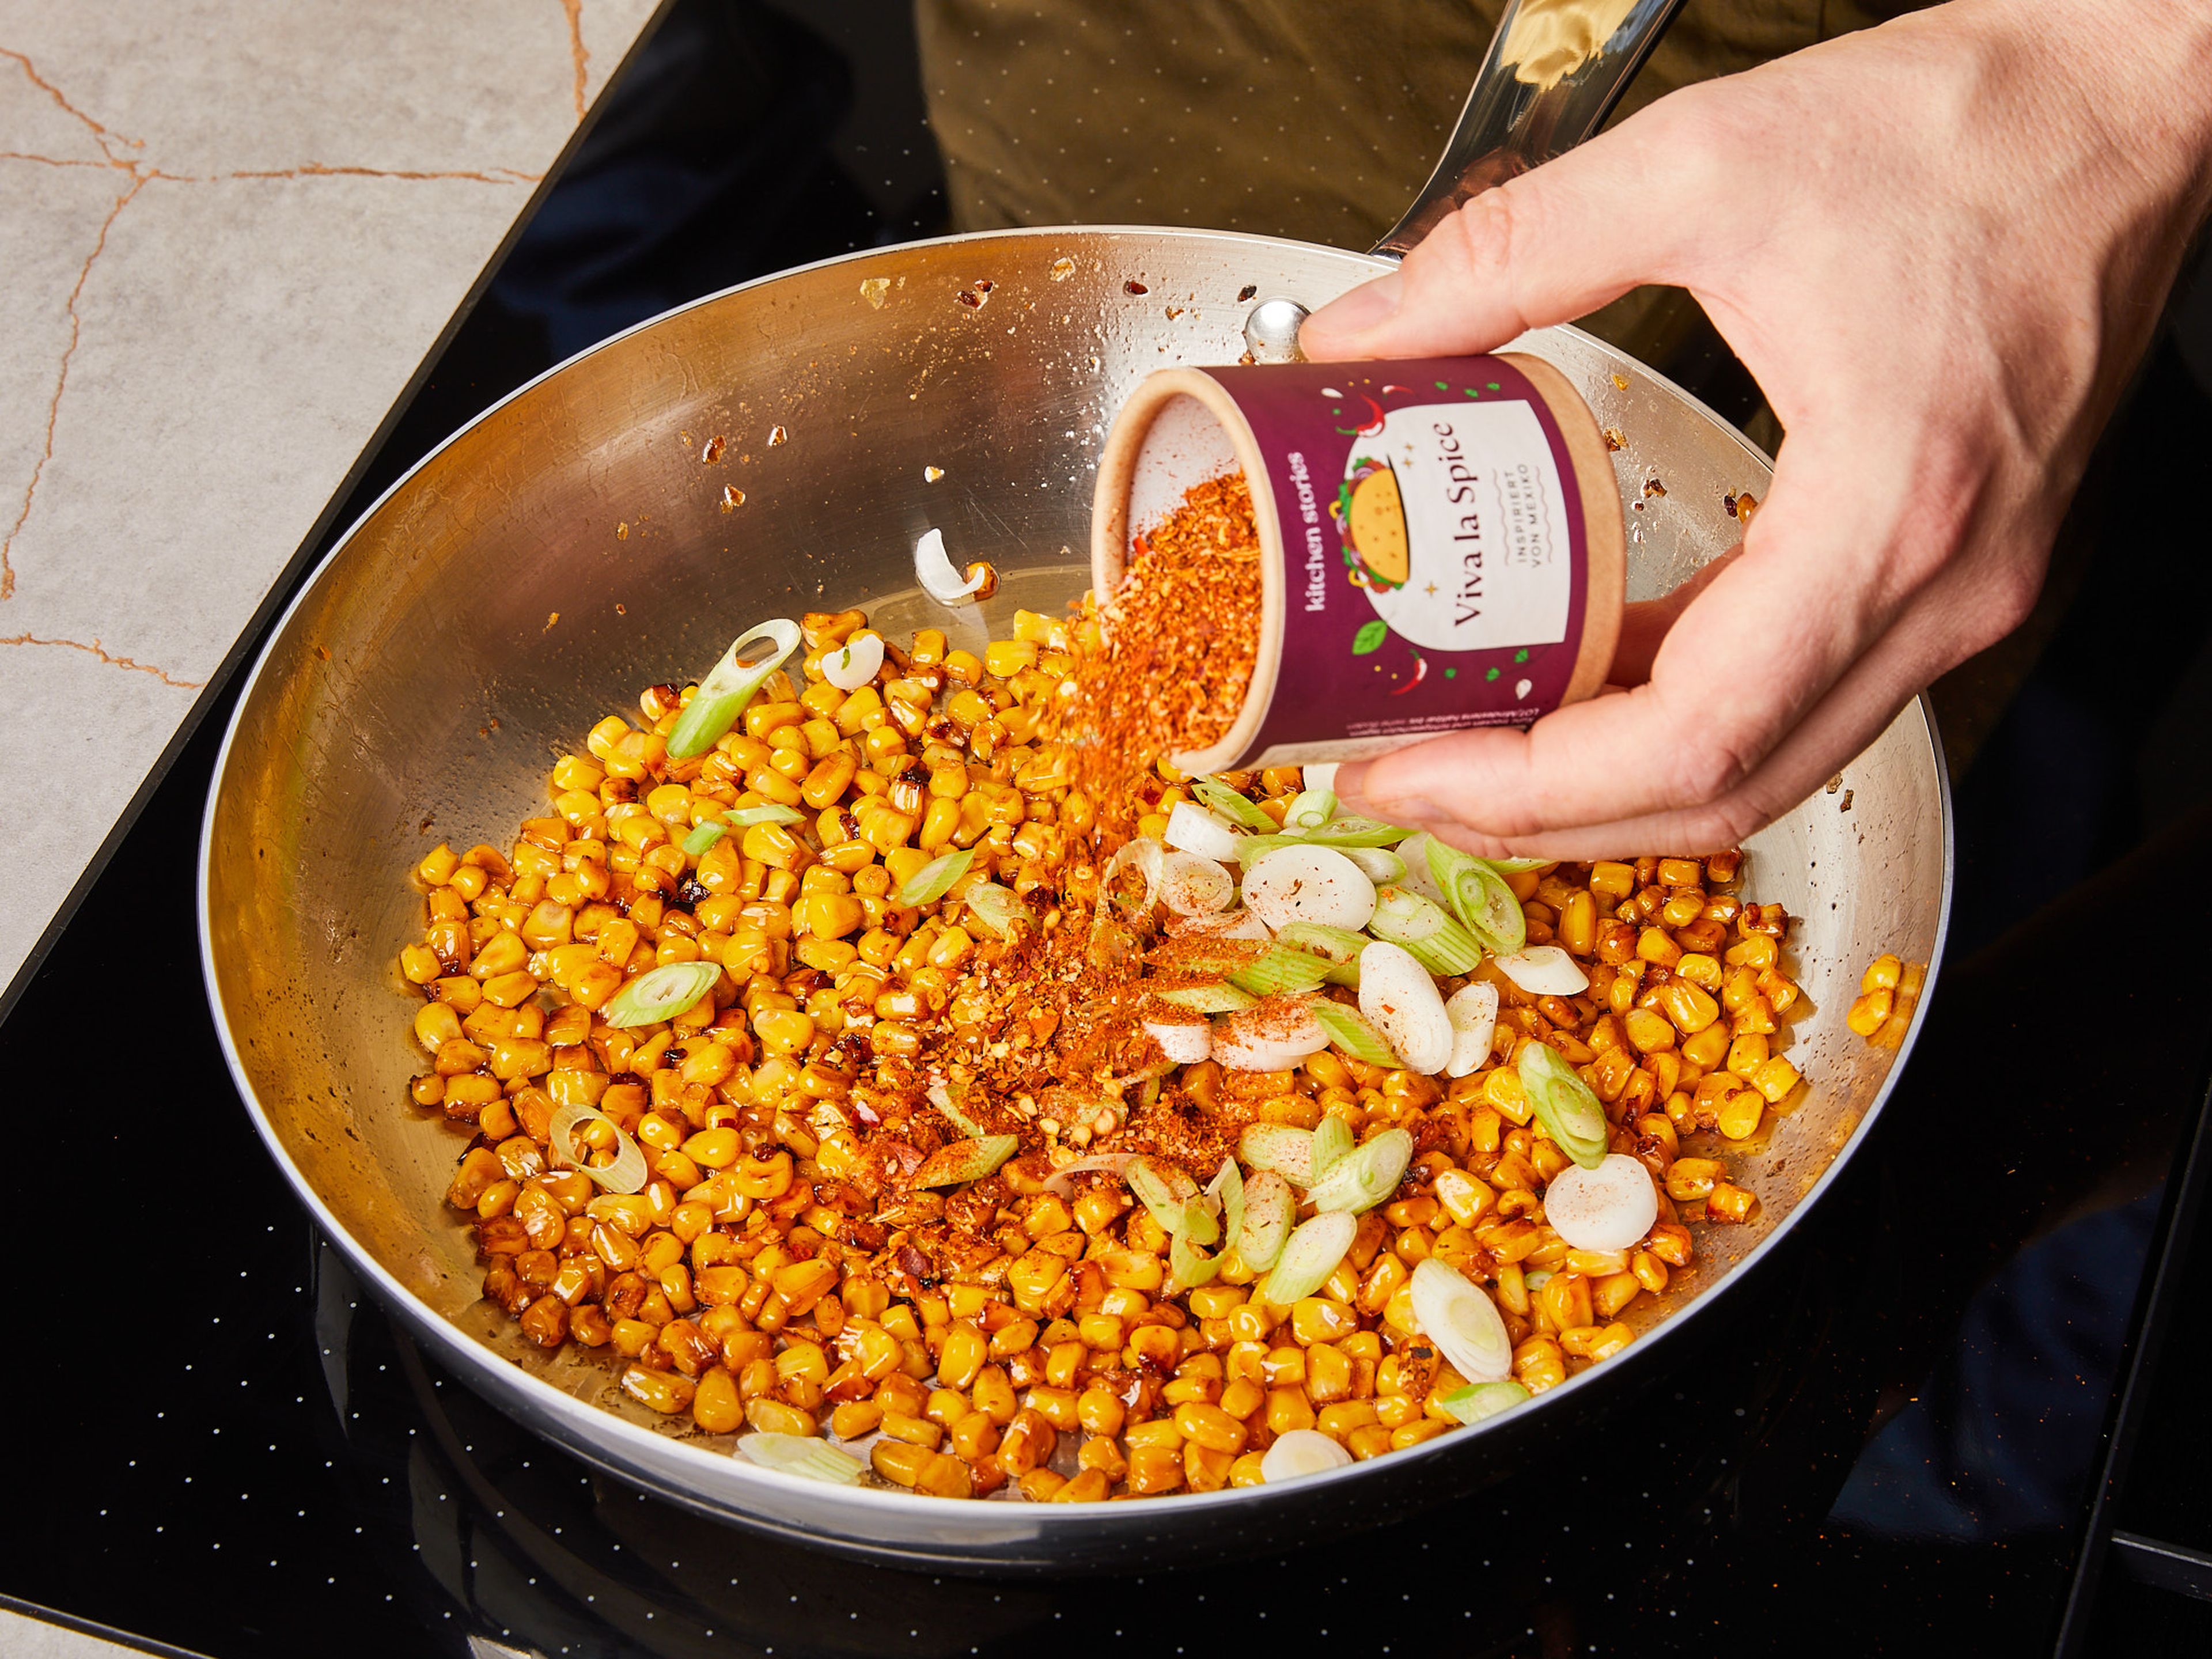 Remove all but approx. 2 tablespoons of the excess fat from the pan. Increase heat again and add the drained corn. Fry for approx. 5–6 min. stirring occasionally, until the kernels turn golden brown. Remove some of the corn kernels from the pan and set aside to garnish later. Add the scallion whites and VIVA LA SPICE seasoning, stir briefly until aromatic, then add the pan contents to the pasta.